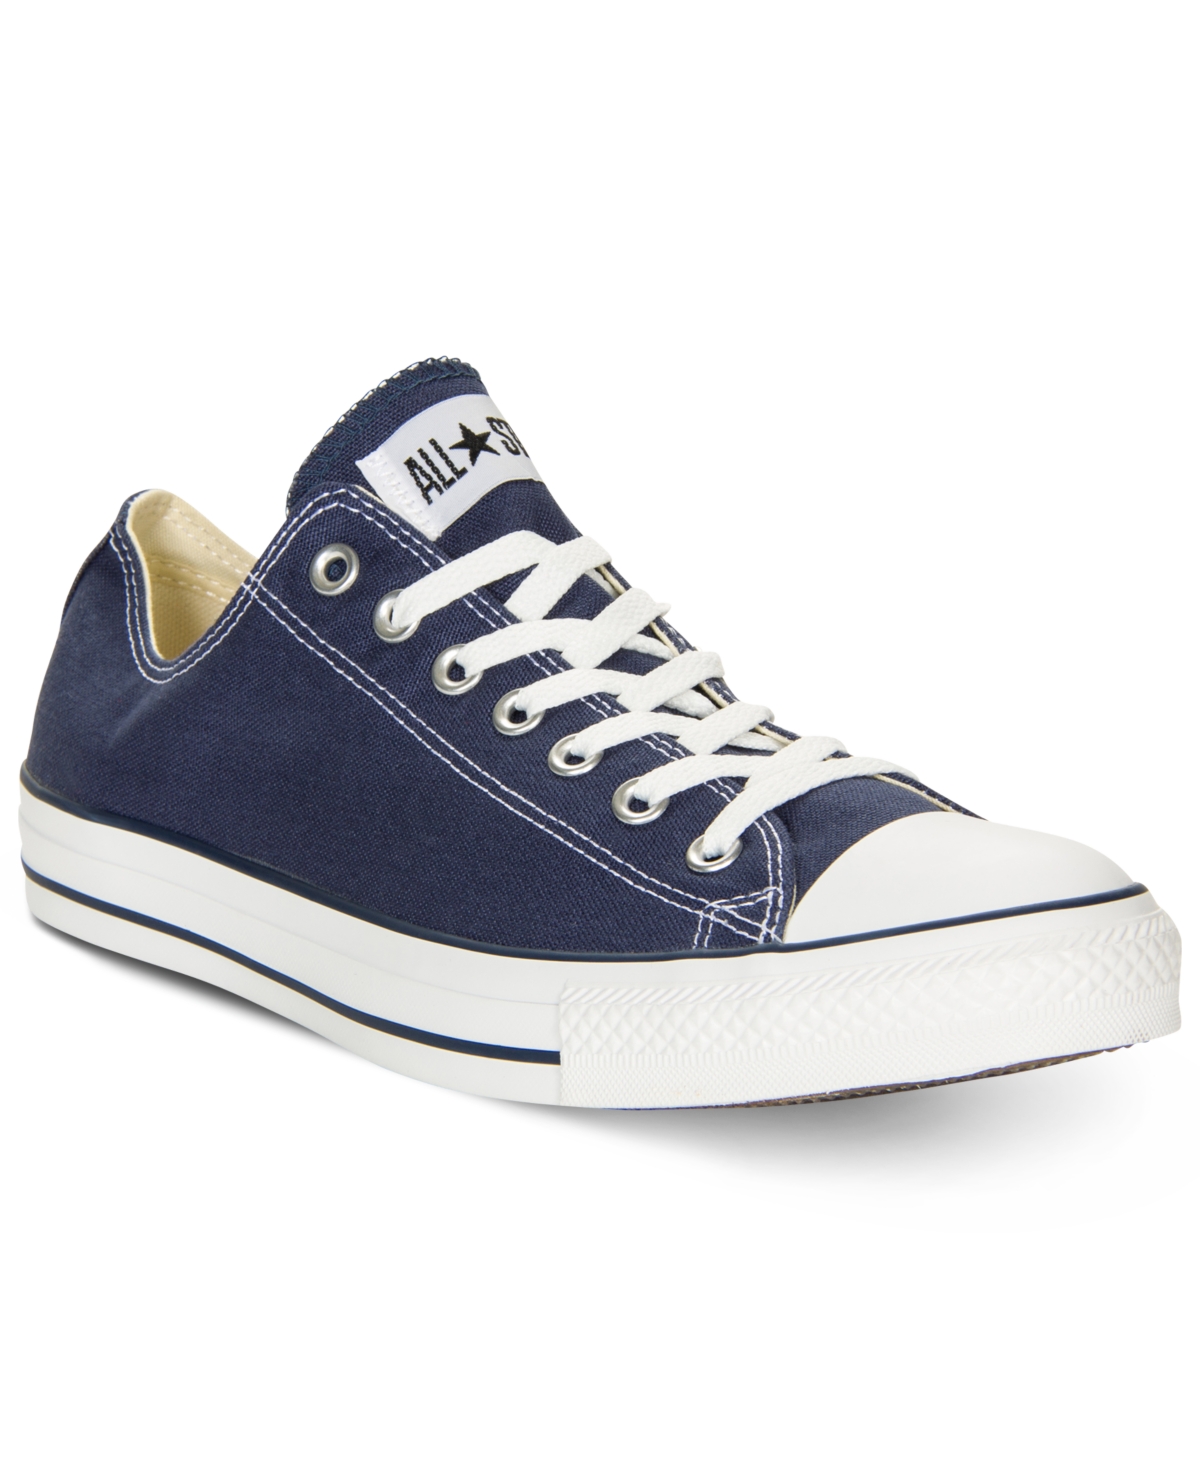 UPC 022859567077 product image for Converse Men's Chuck Taylor Low Top Sneakers from Finish Line | upcitemdb.com